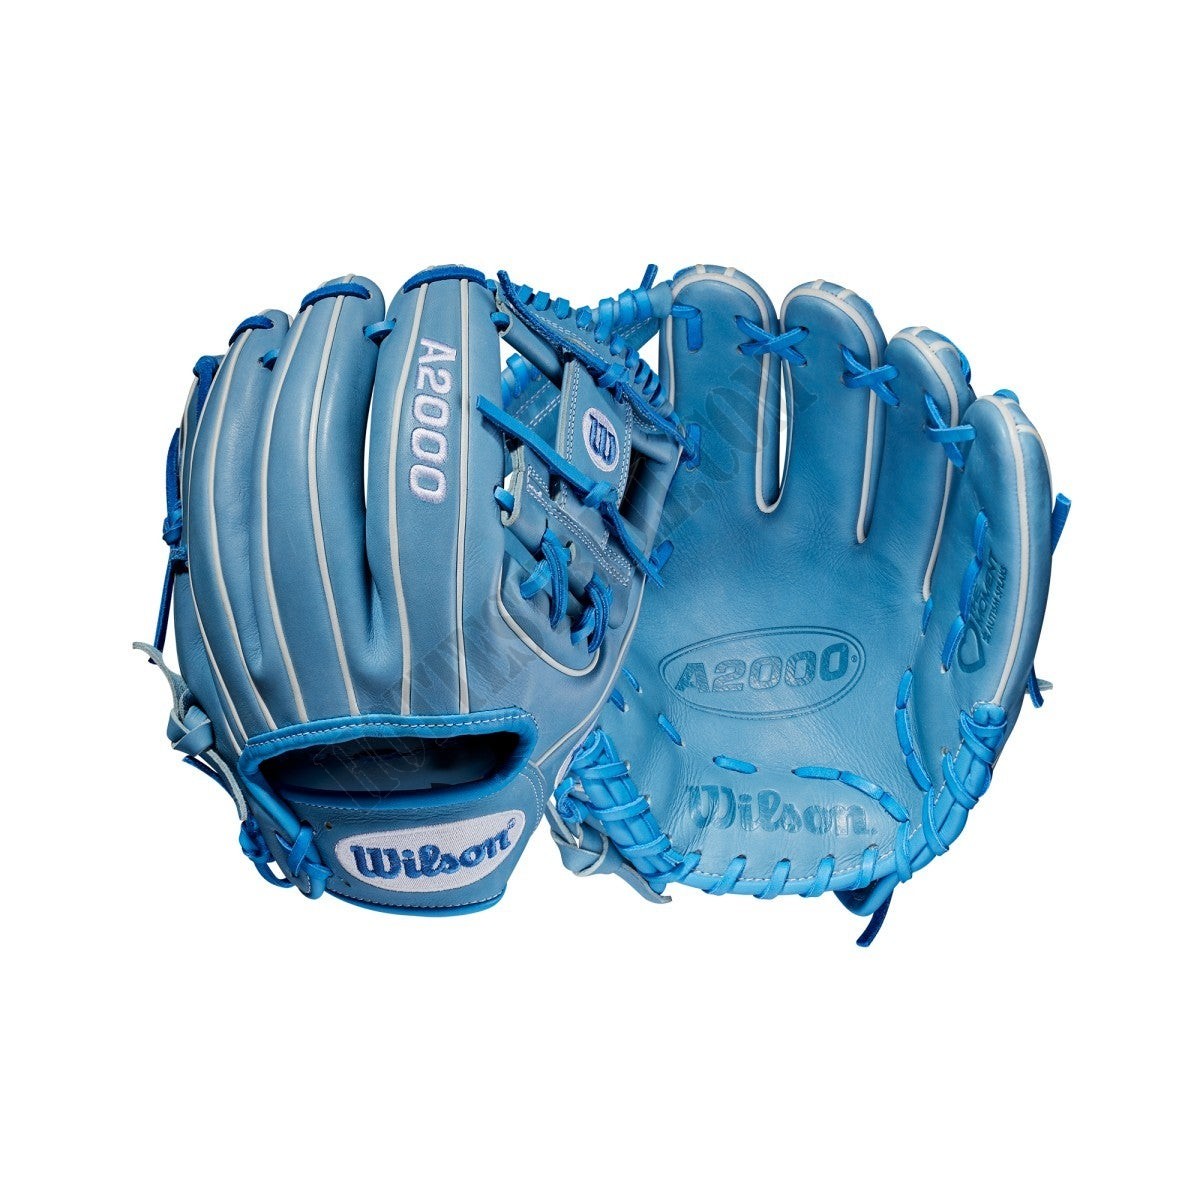 2020 Autism Speaks A2000 1786 11.5" Infield Baseball Glove - Limited Edition ● Wilson Promotions - -0